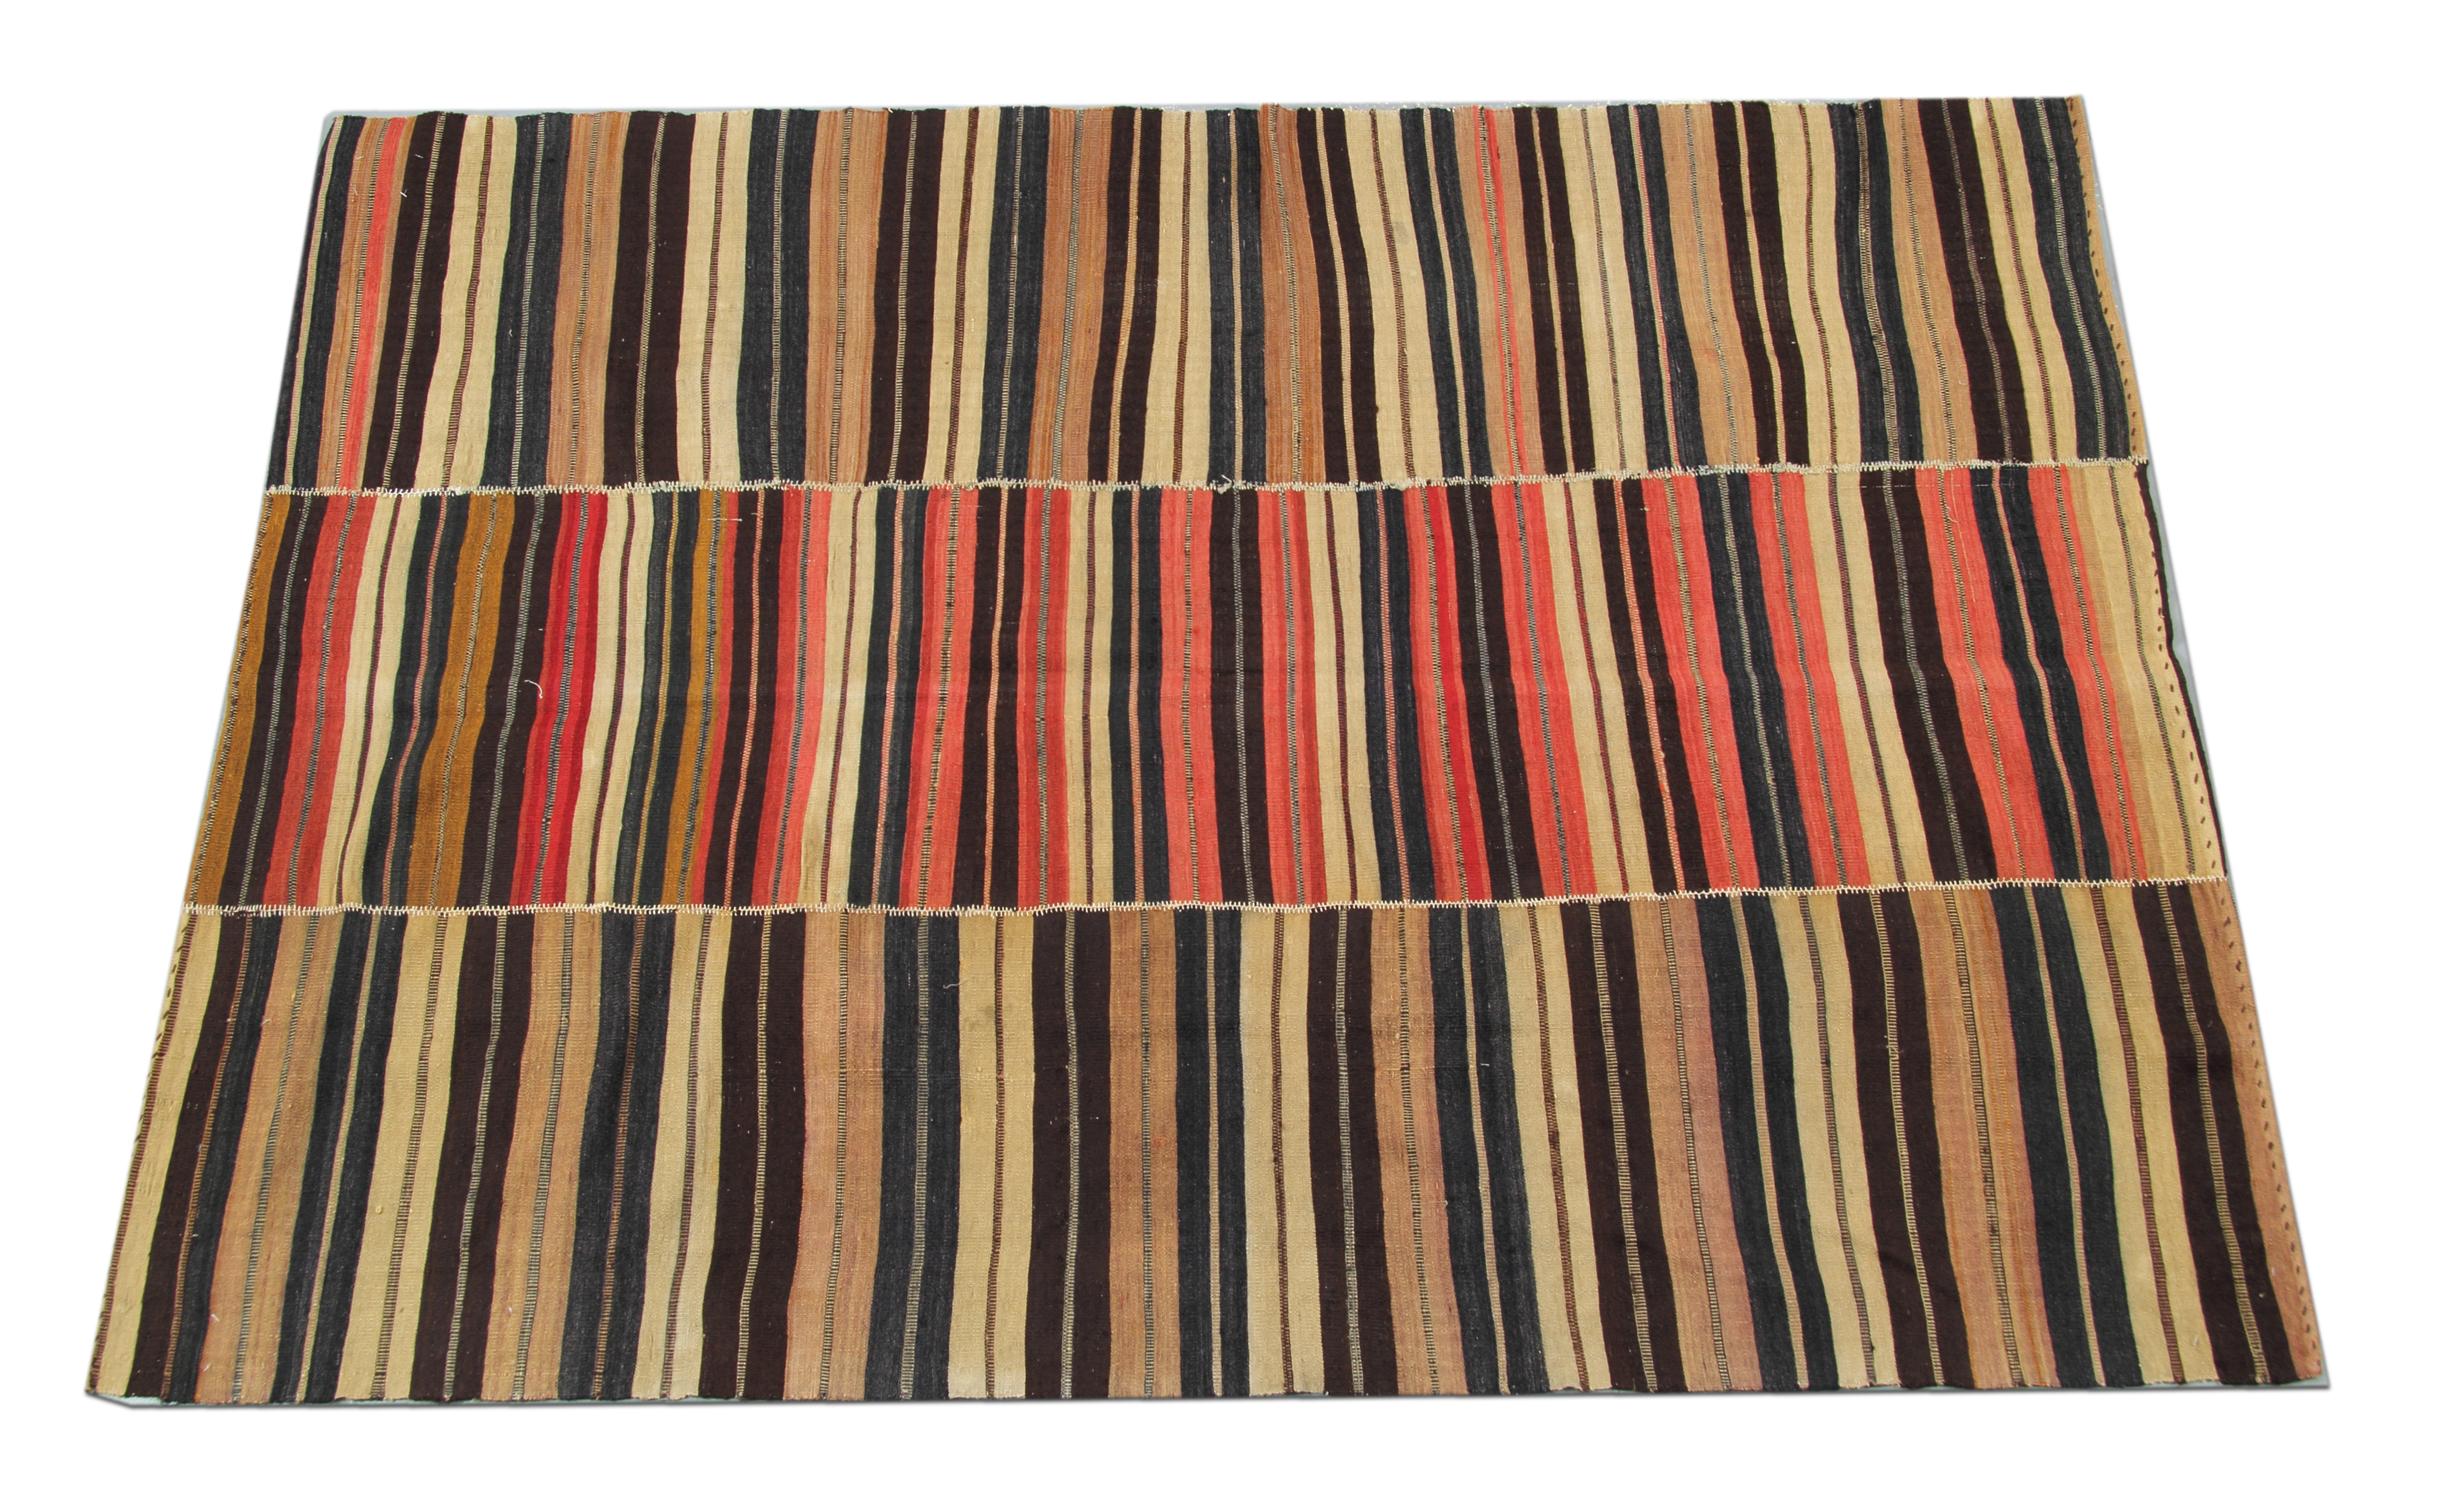 This fine antique rug wool Jajim is a flat-woven Kilim, coverlet or Jajim. It features a versatile pattern with varying width stripes in beautiful beige, red, brown and blue accents. The colour palette and design in this elegant piece make it the